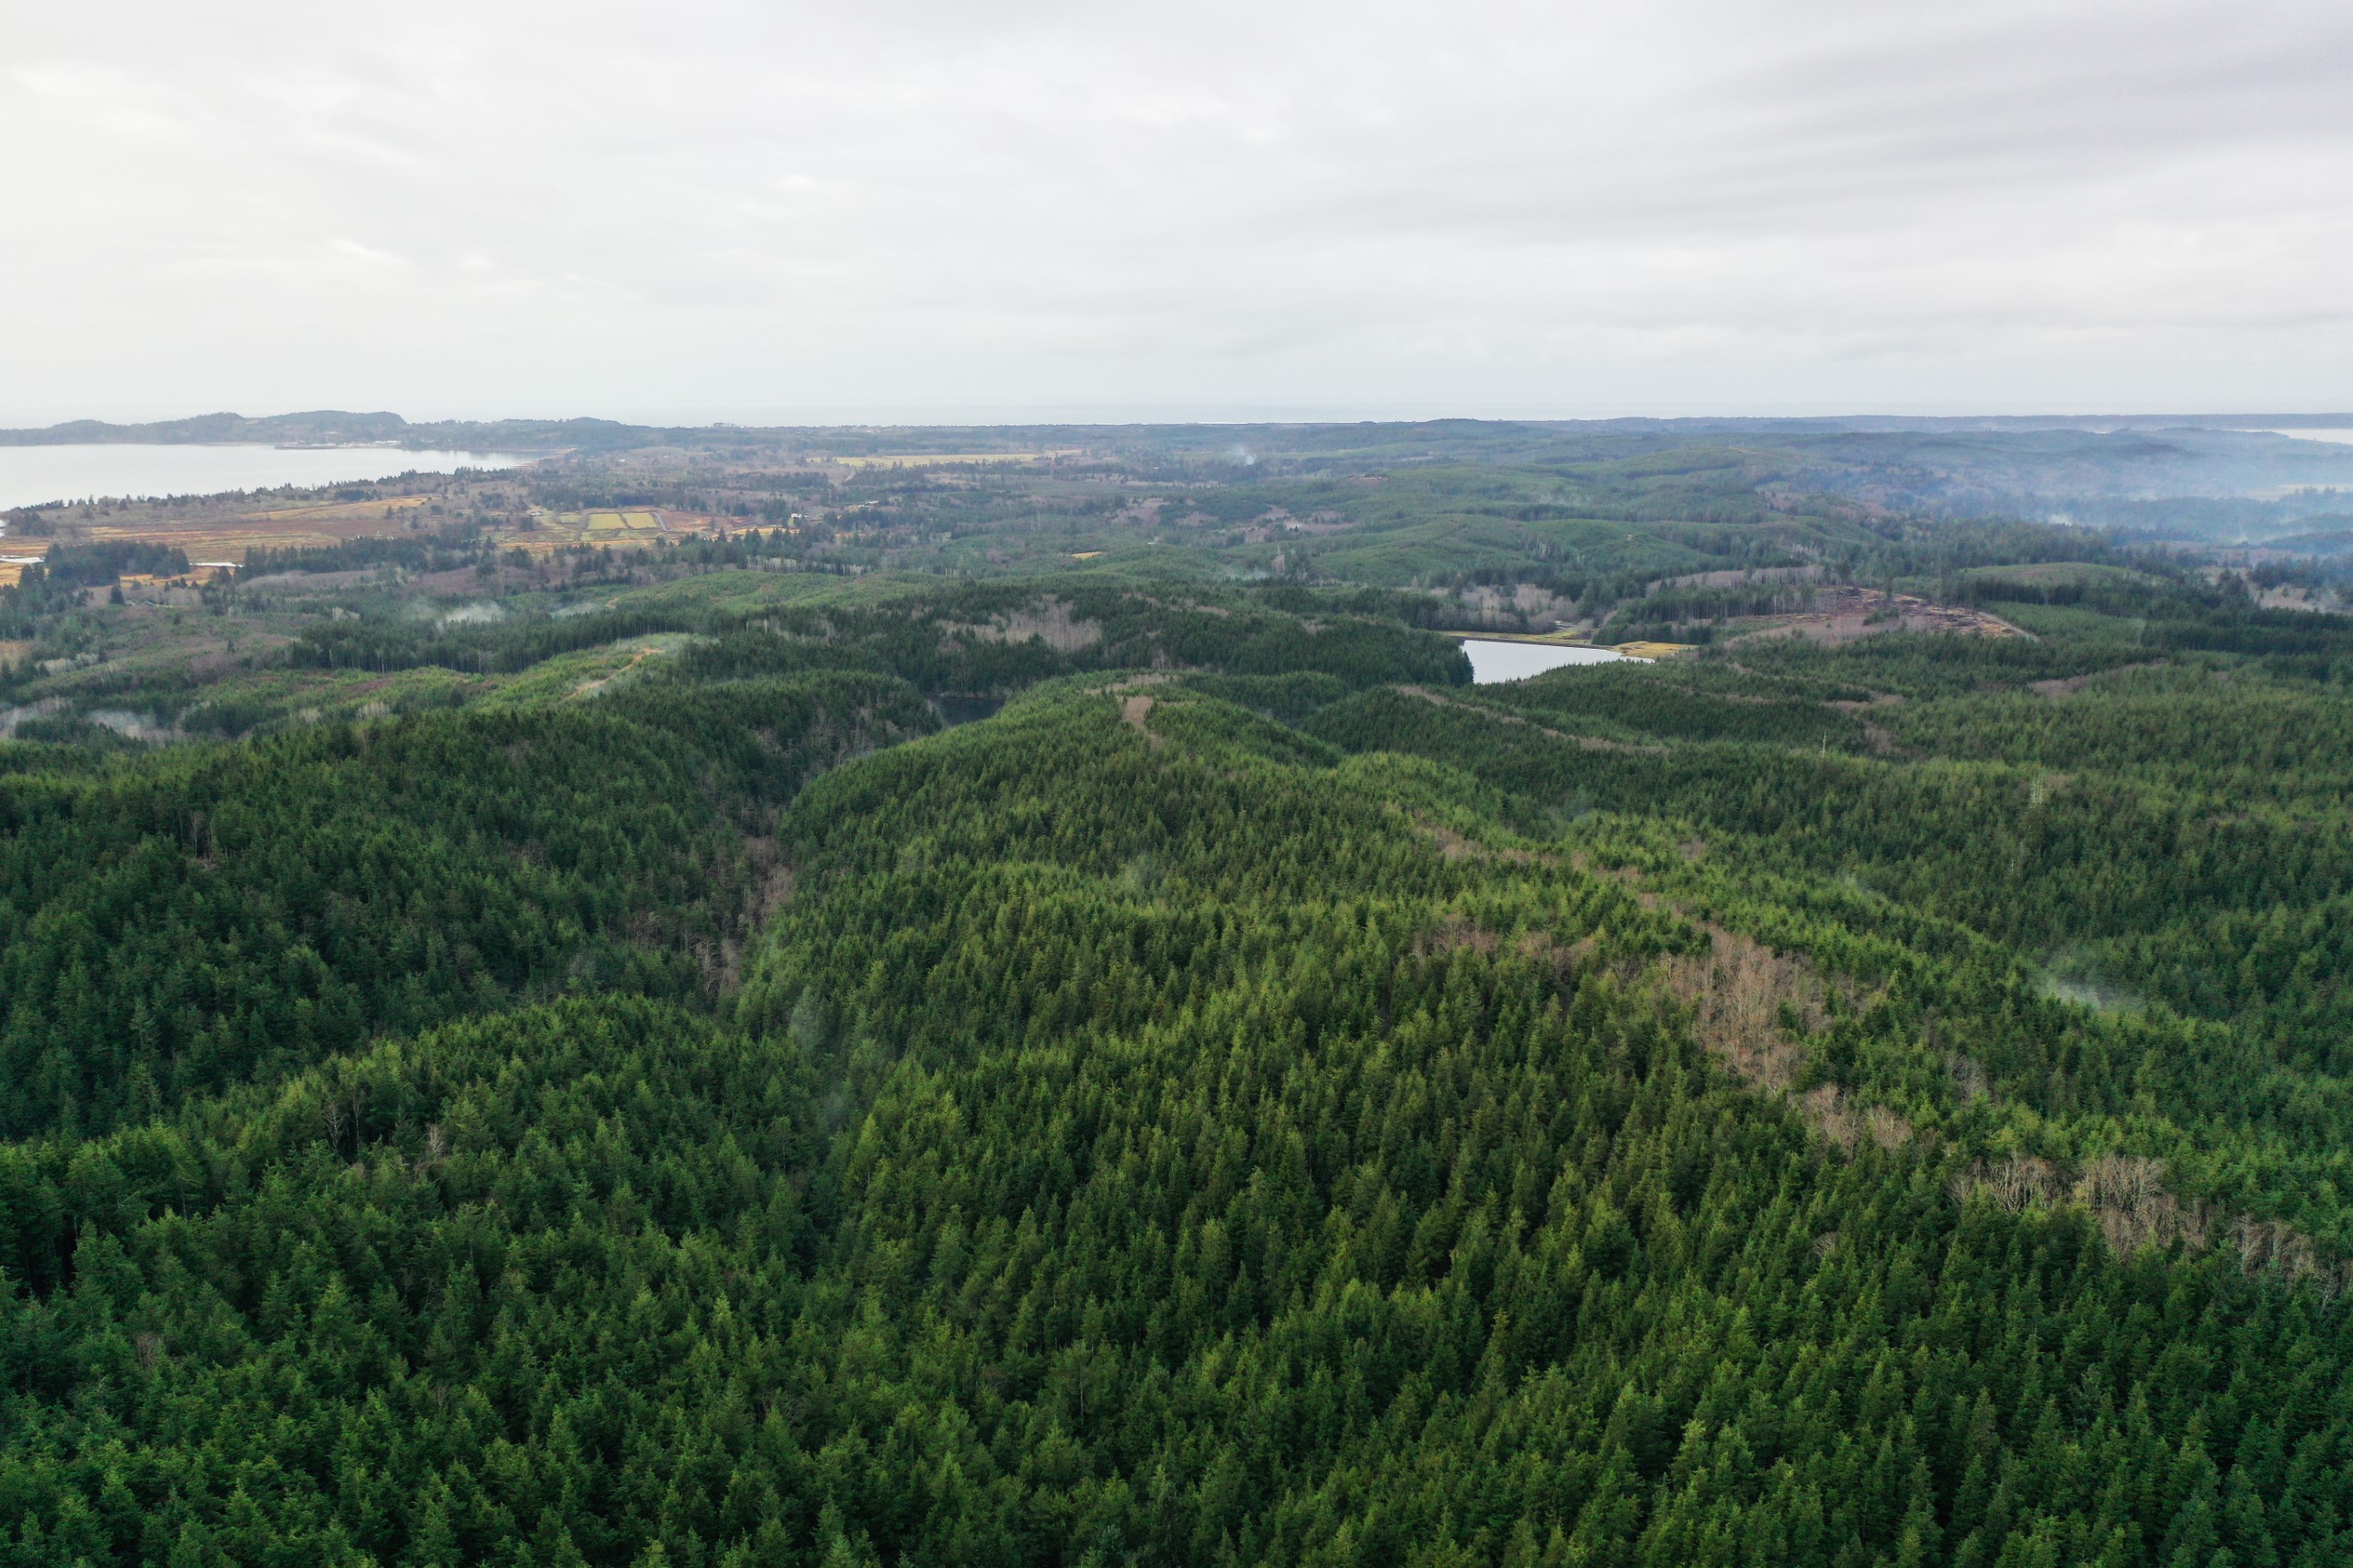 Looking out across the new community forest, with the reservoir in the center, Baker Bay and the city of Ilwaco in the upper left, the Pacific Ocean along the top, and the southernmost point of Willapa Bay at the top right.